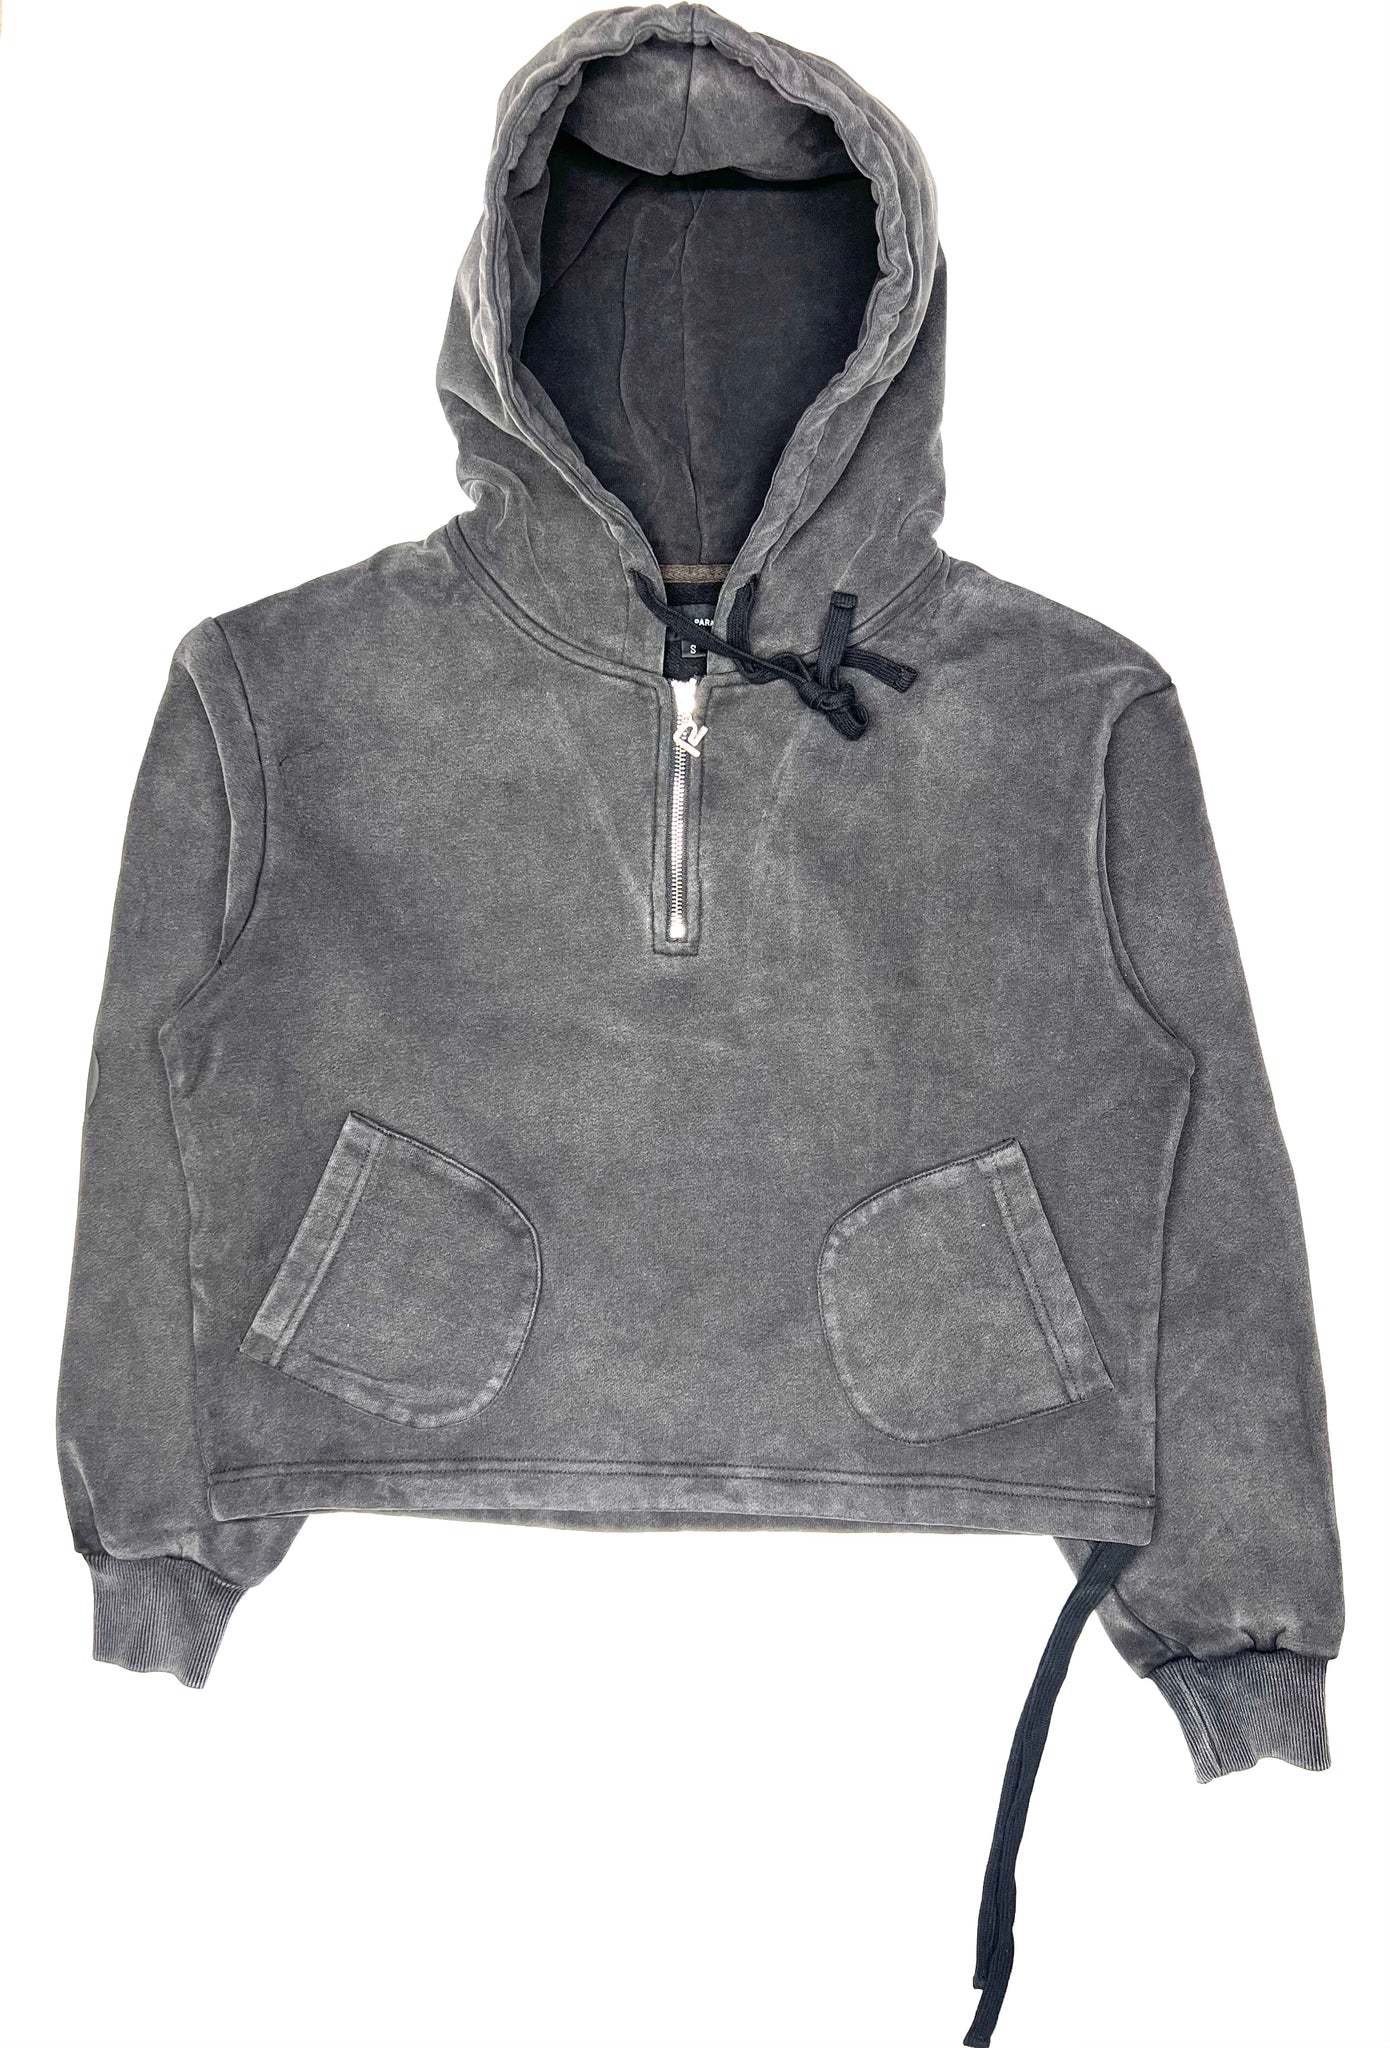 Looking for a similar washed black zip up hoodie as this for under